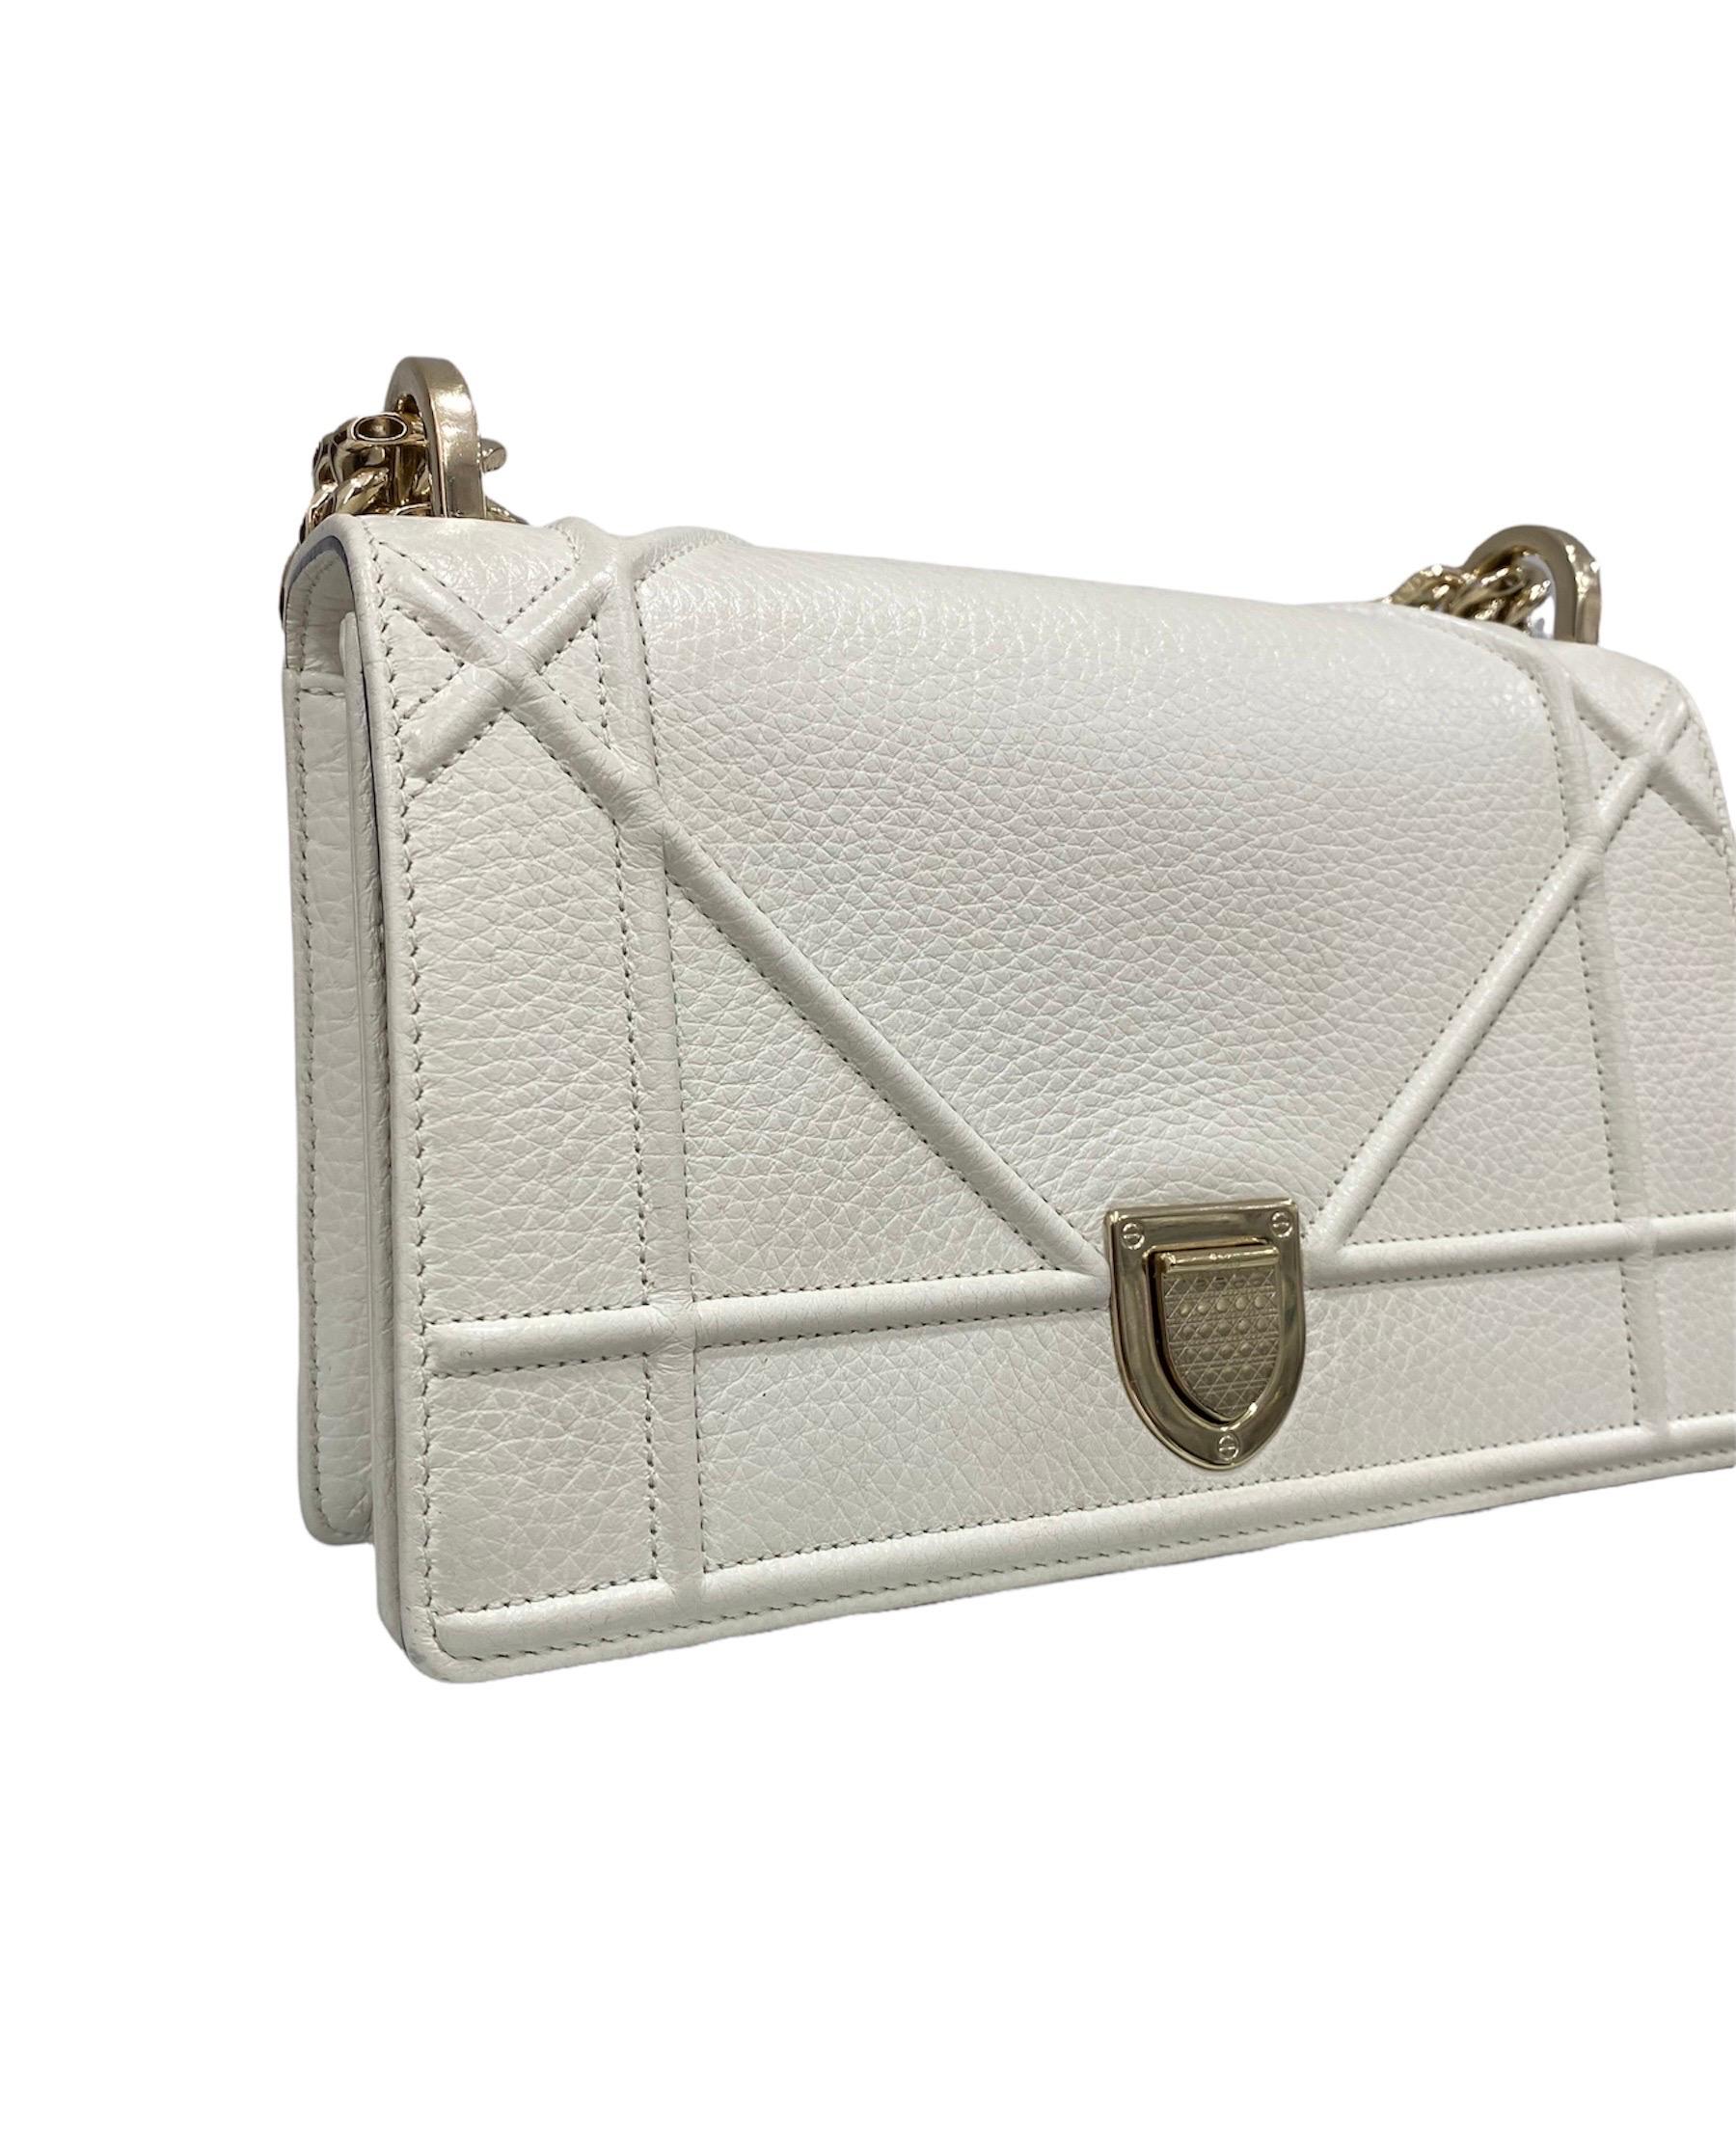 Dior signed bag, Diorama model, made of white leather with golden hardware.

Equipped with a flap with interlocking closure, internally lined in white suede, roomy for the essentials.

Equipped with a sliding leather and chain shoulder strap and an